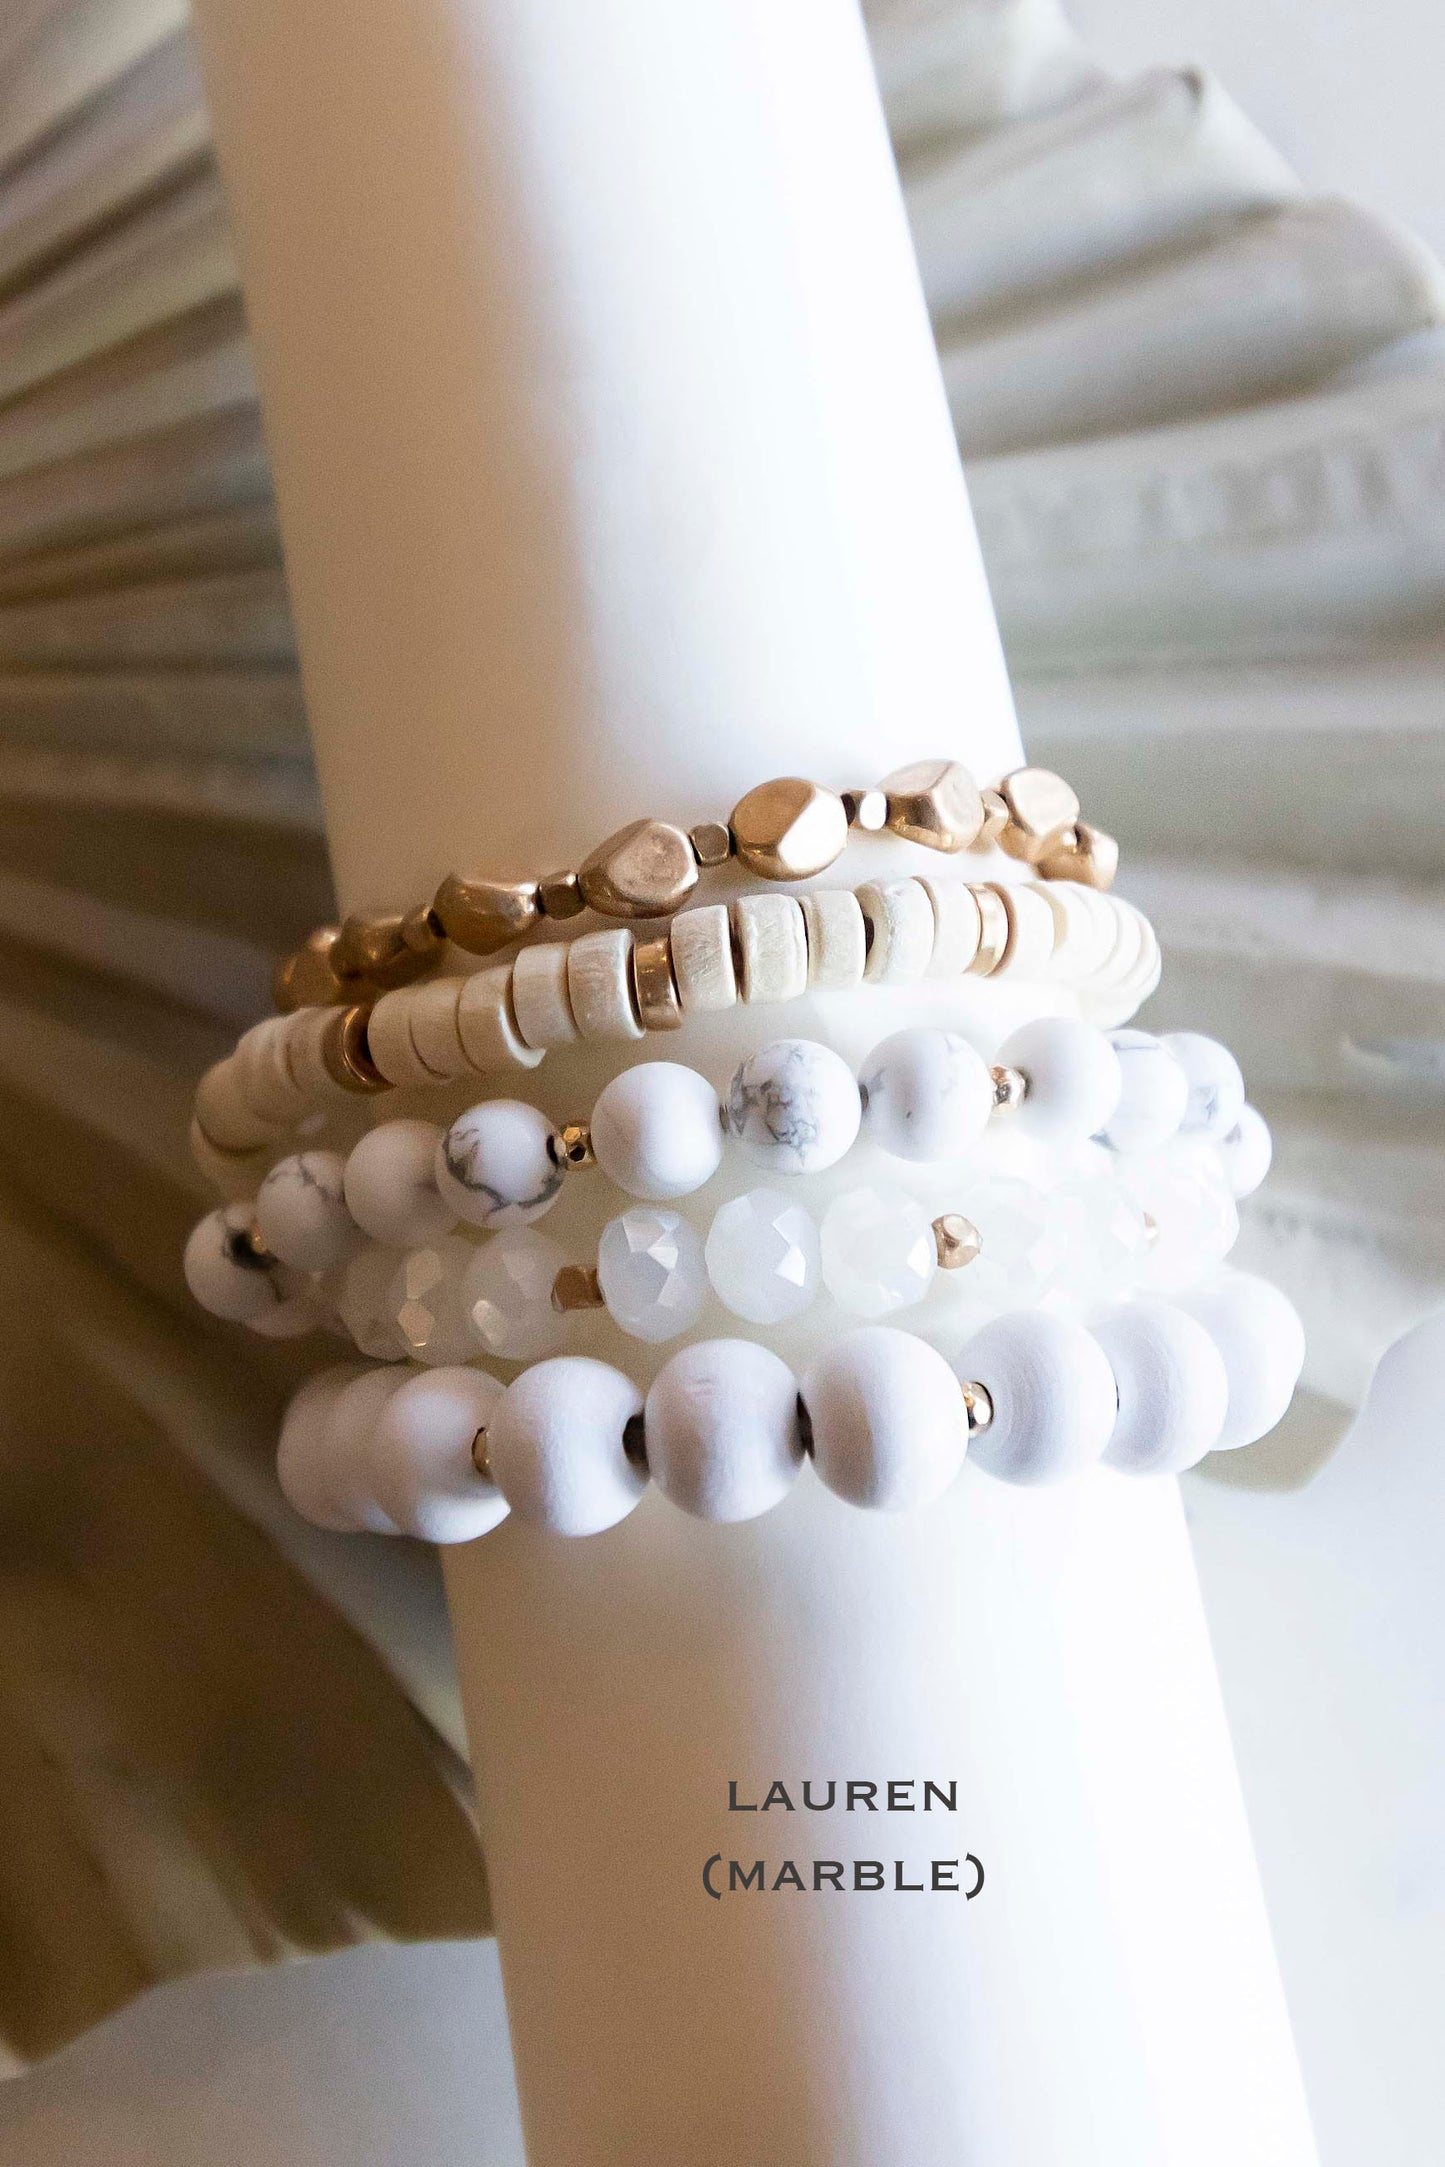 Load image into Gallery viewer, Lauren Wood Bracelet Stacks | Natural Wood Stone and Crystal Beads | Boho Layering Bracelets
